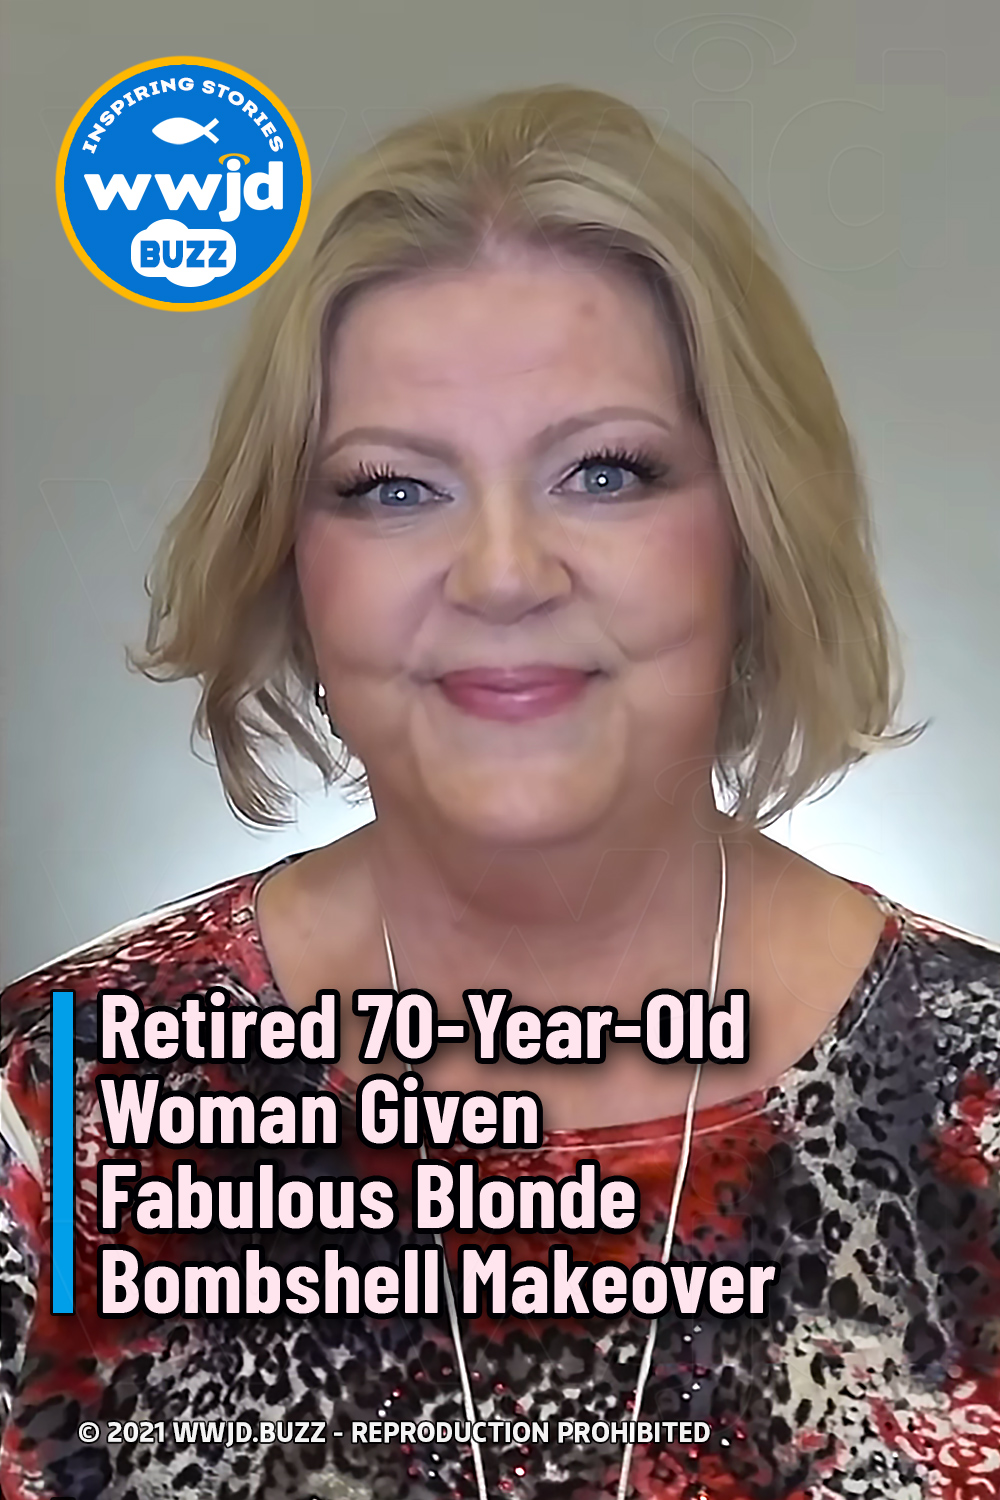 Retired 70-Year-Old Woman Given Fabulous Blonde Bombshell Makeover